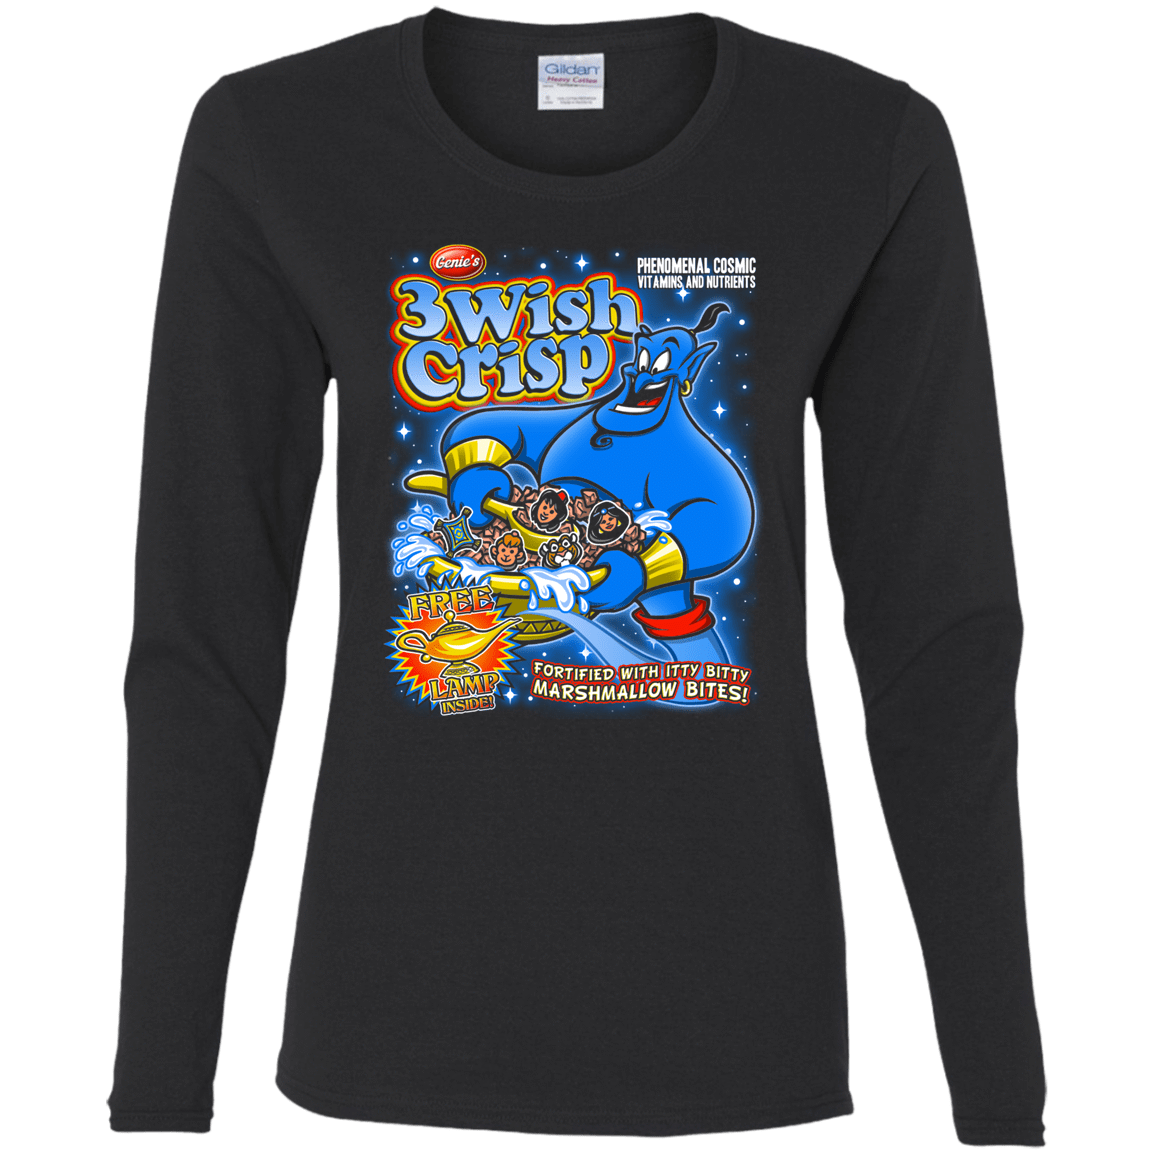 T-Shirts Black / S Genie Cereal Women's Long Sleeve T-Shirt